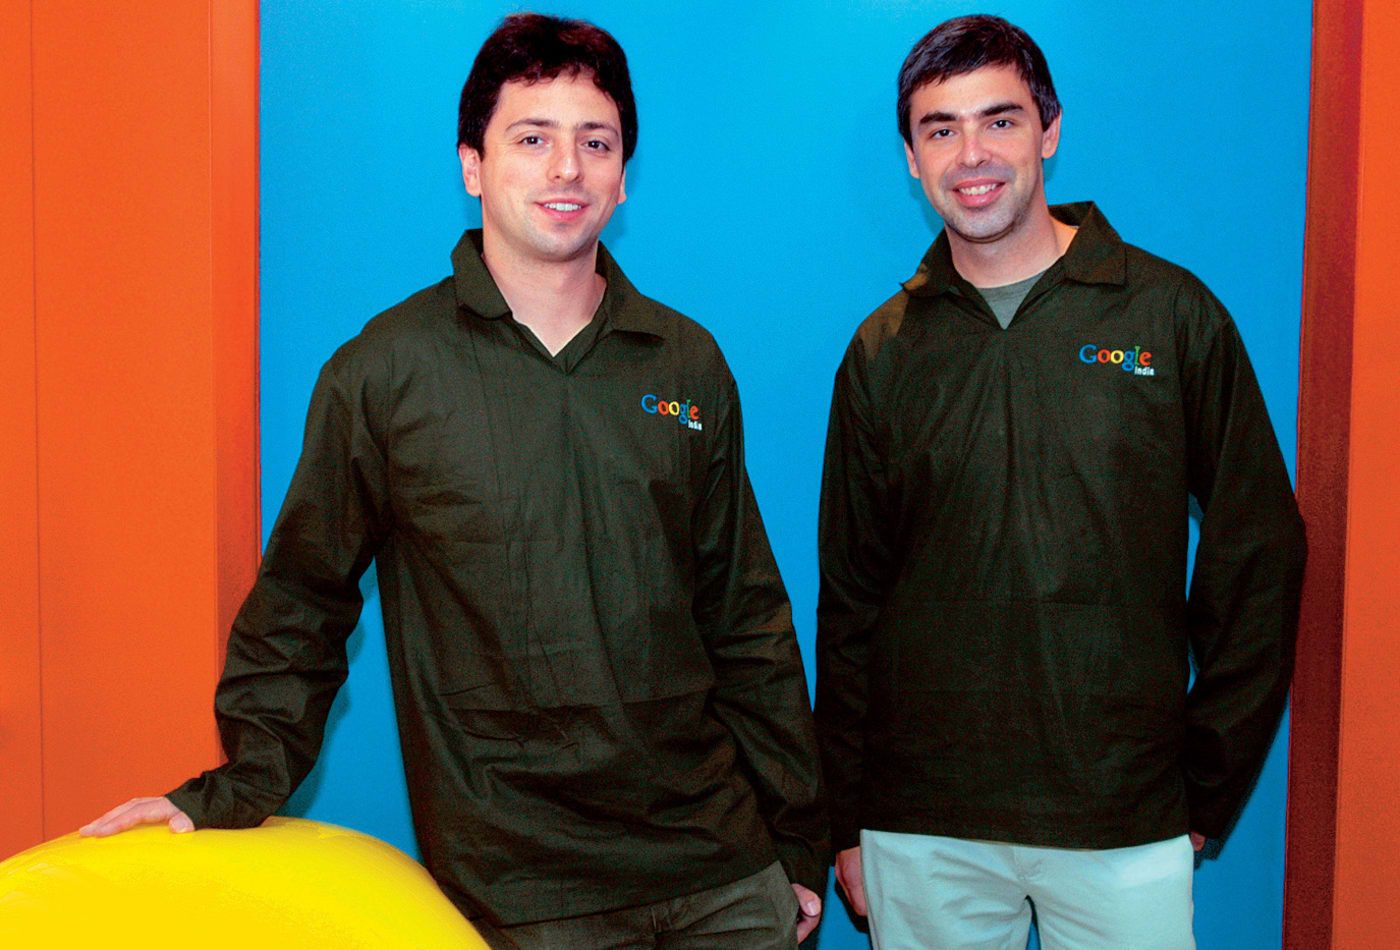 surprising facts you might not know about Google's early days